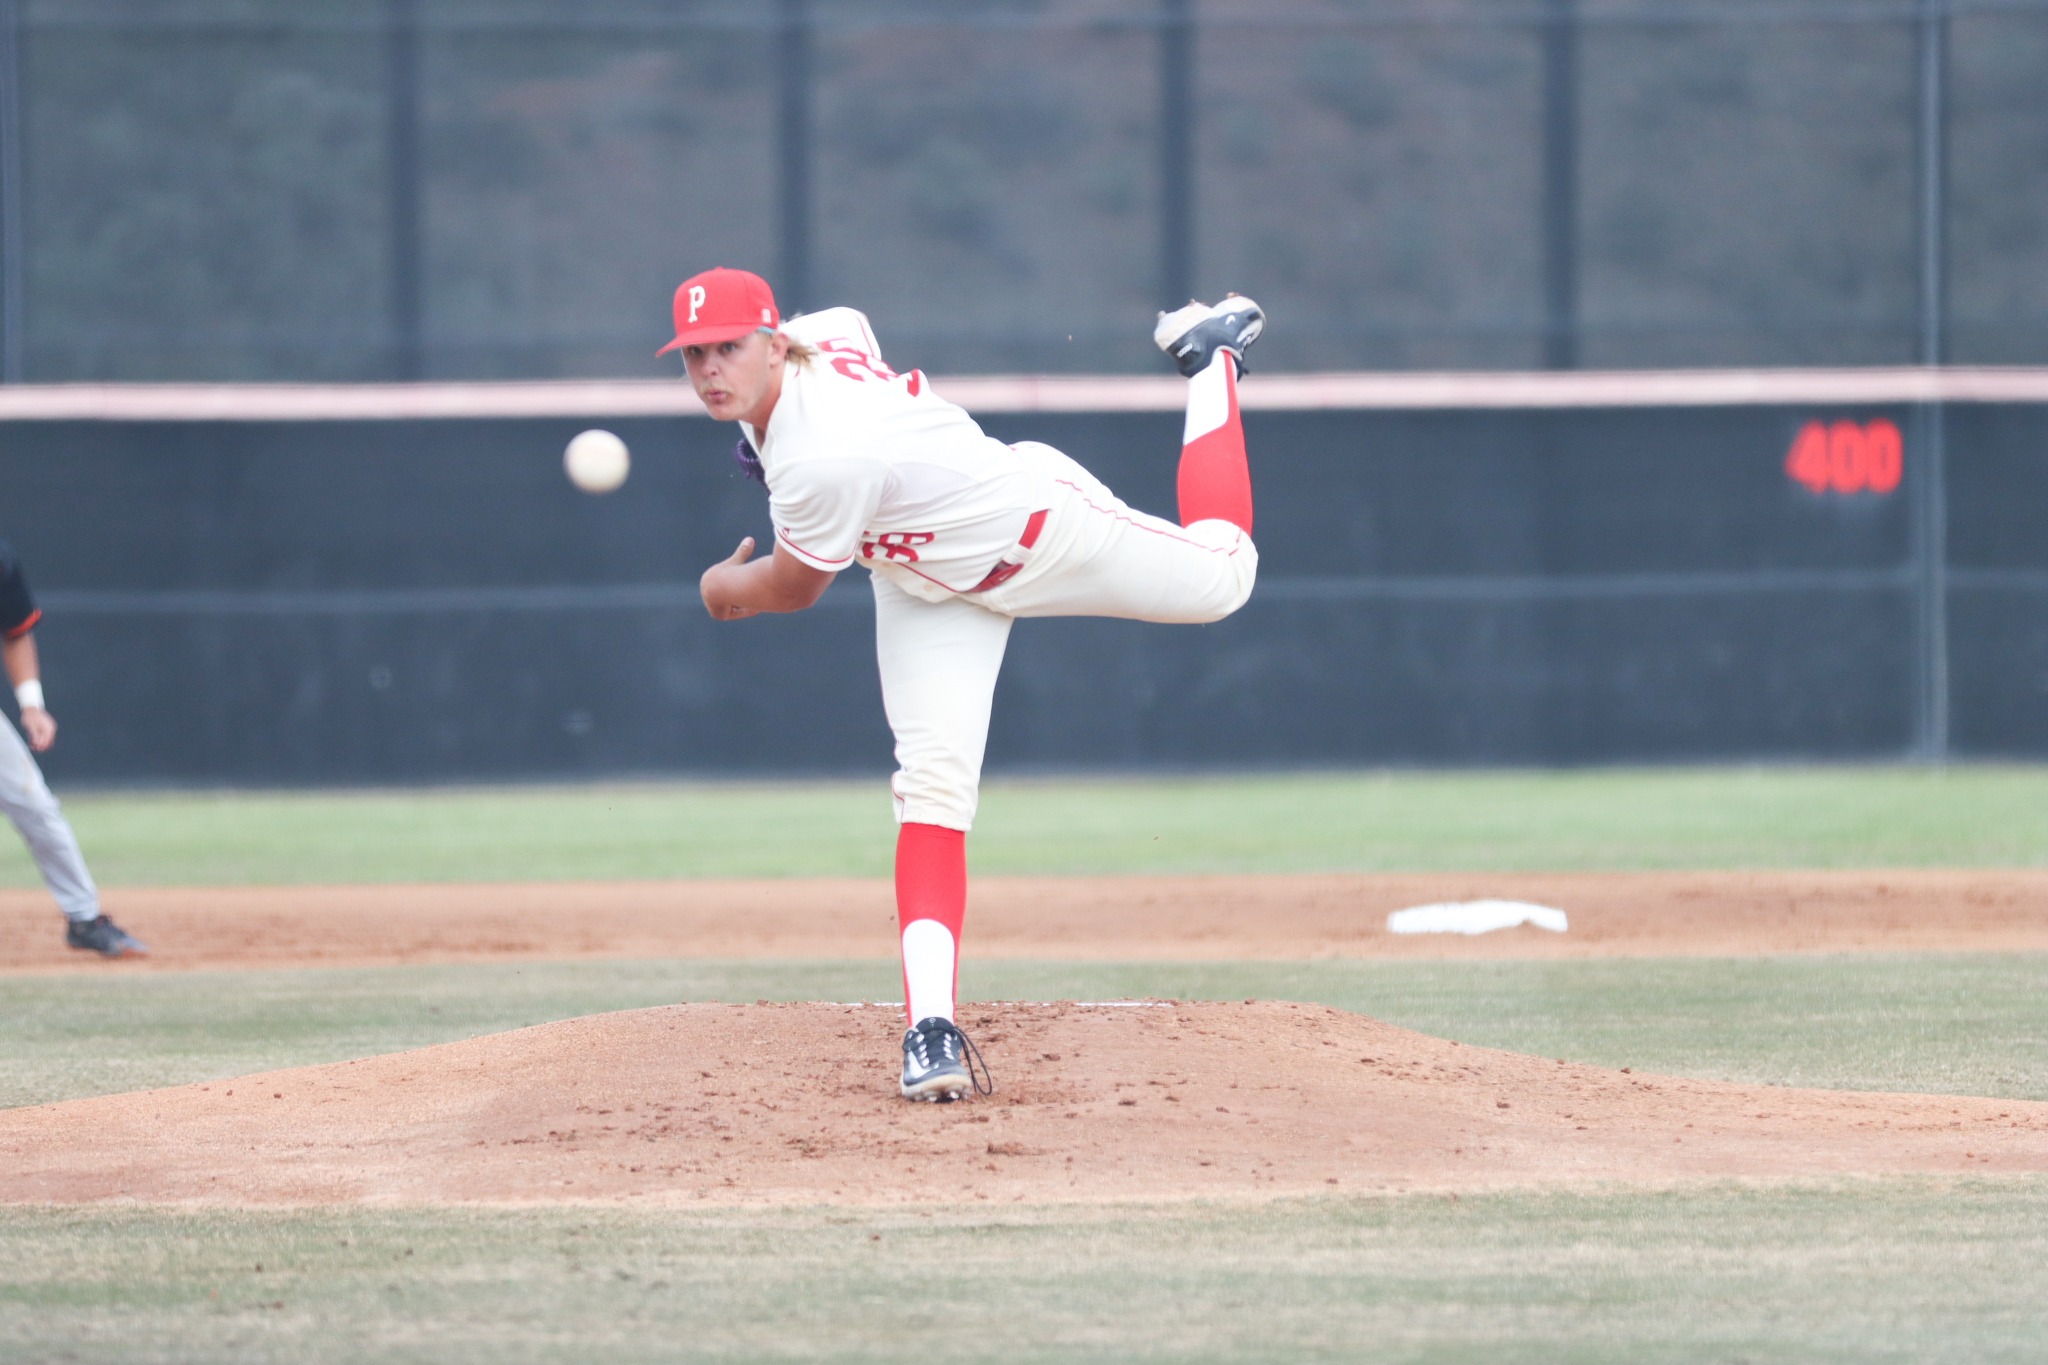 Logan Hunt pitched a one-hit shutout in five innings and struck out 10 strikeouts. Photo by Cara Heise.